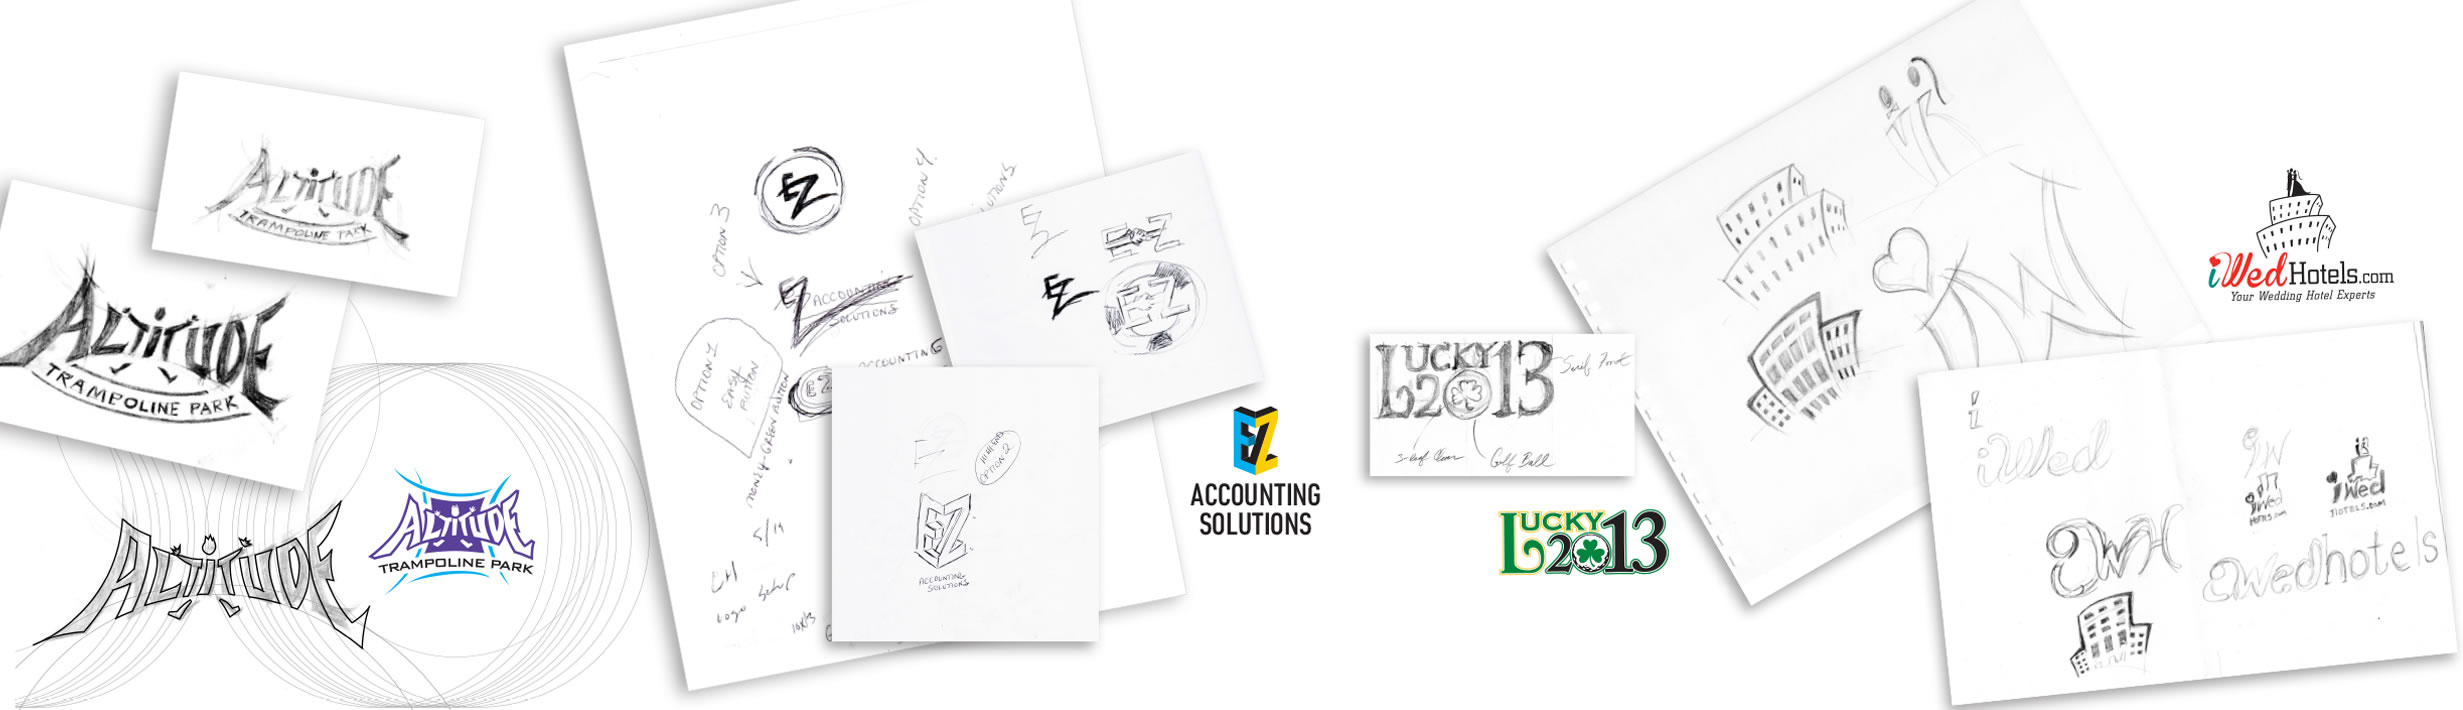 Three examples of logo design from sketch to final iconic logo artwork.